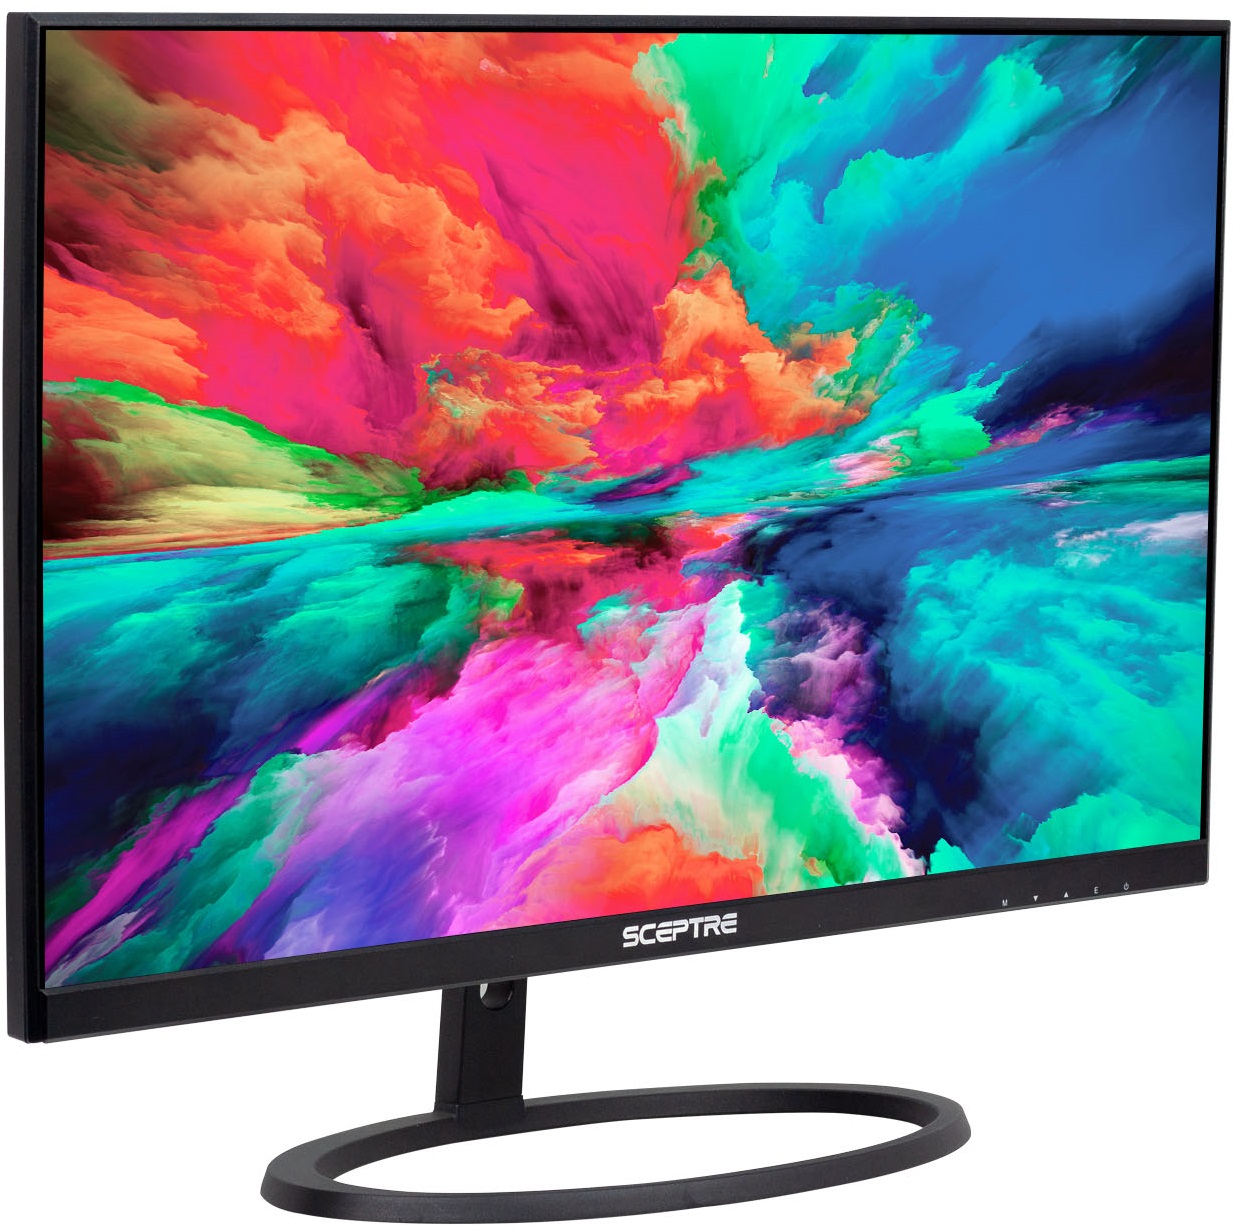 Sceptre IPS E275W-QPT 27-Inch Quad HD IPS LED Monitor with Tiltable LED  Display